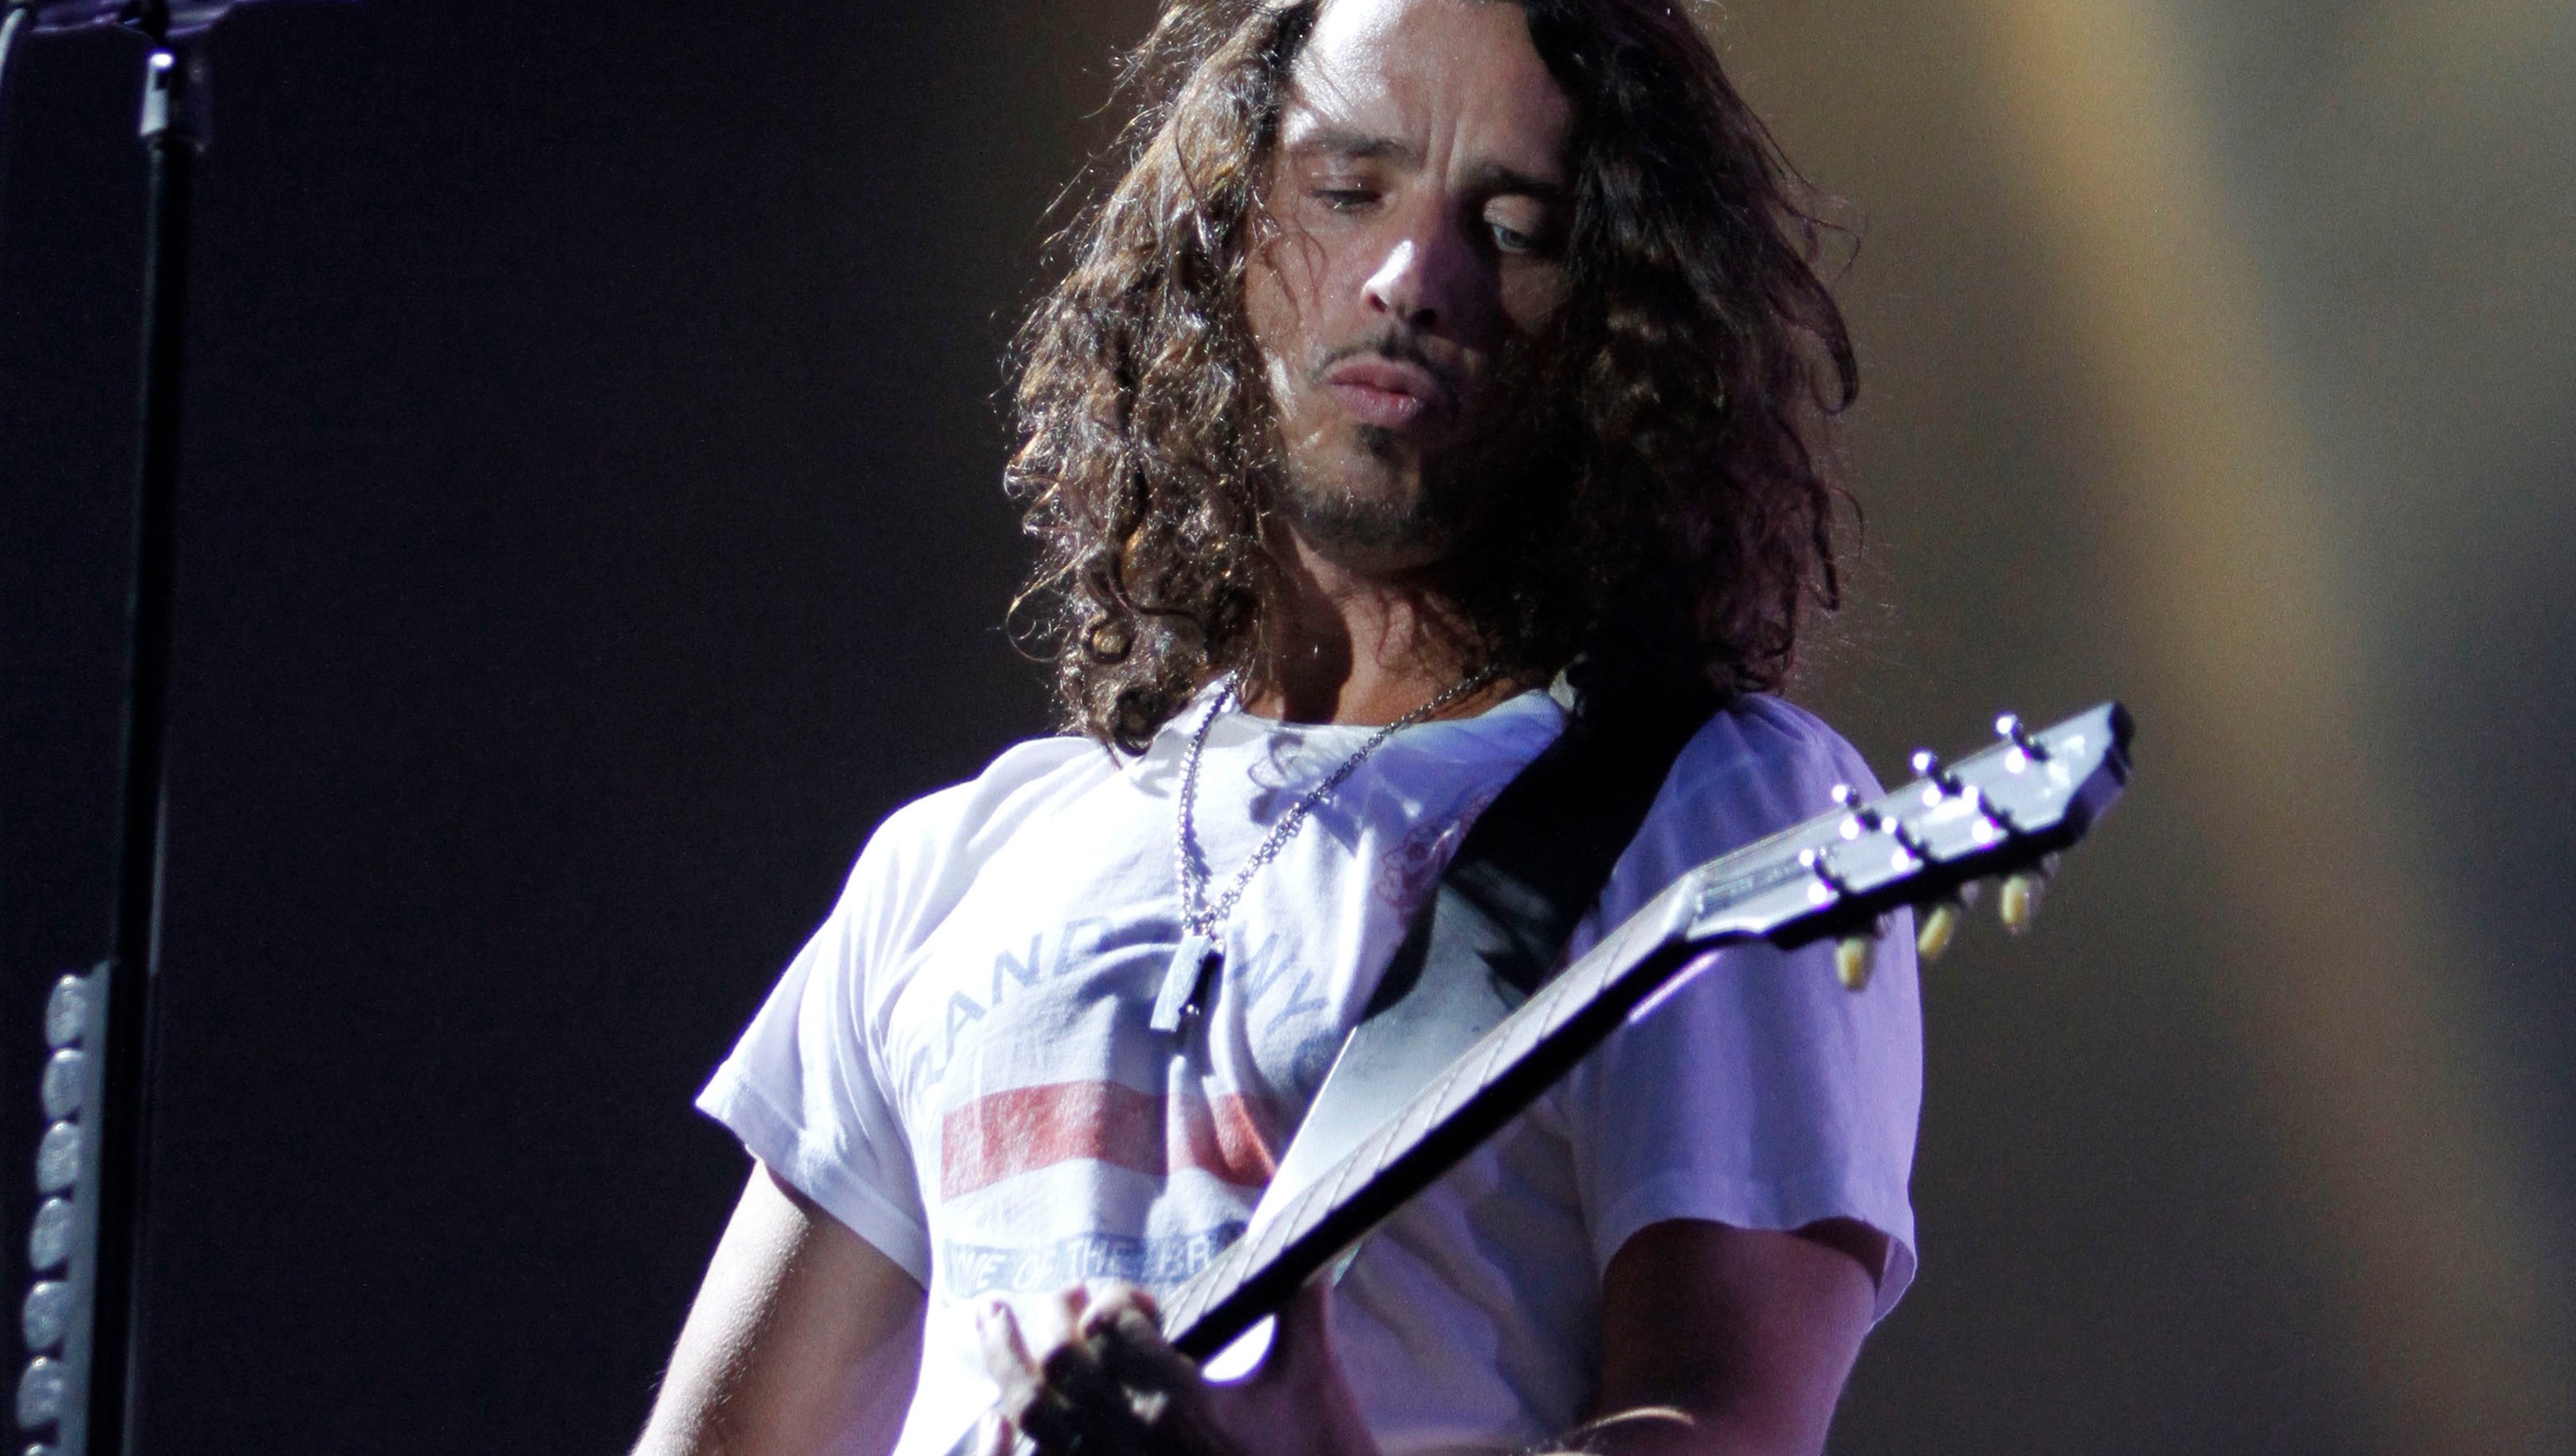 In this Aug. 8, 2010, photo, Chris Cornell of Soundgarden performs during the Lollapalooza music festival in Grant Park in Chicago.